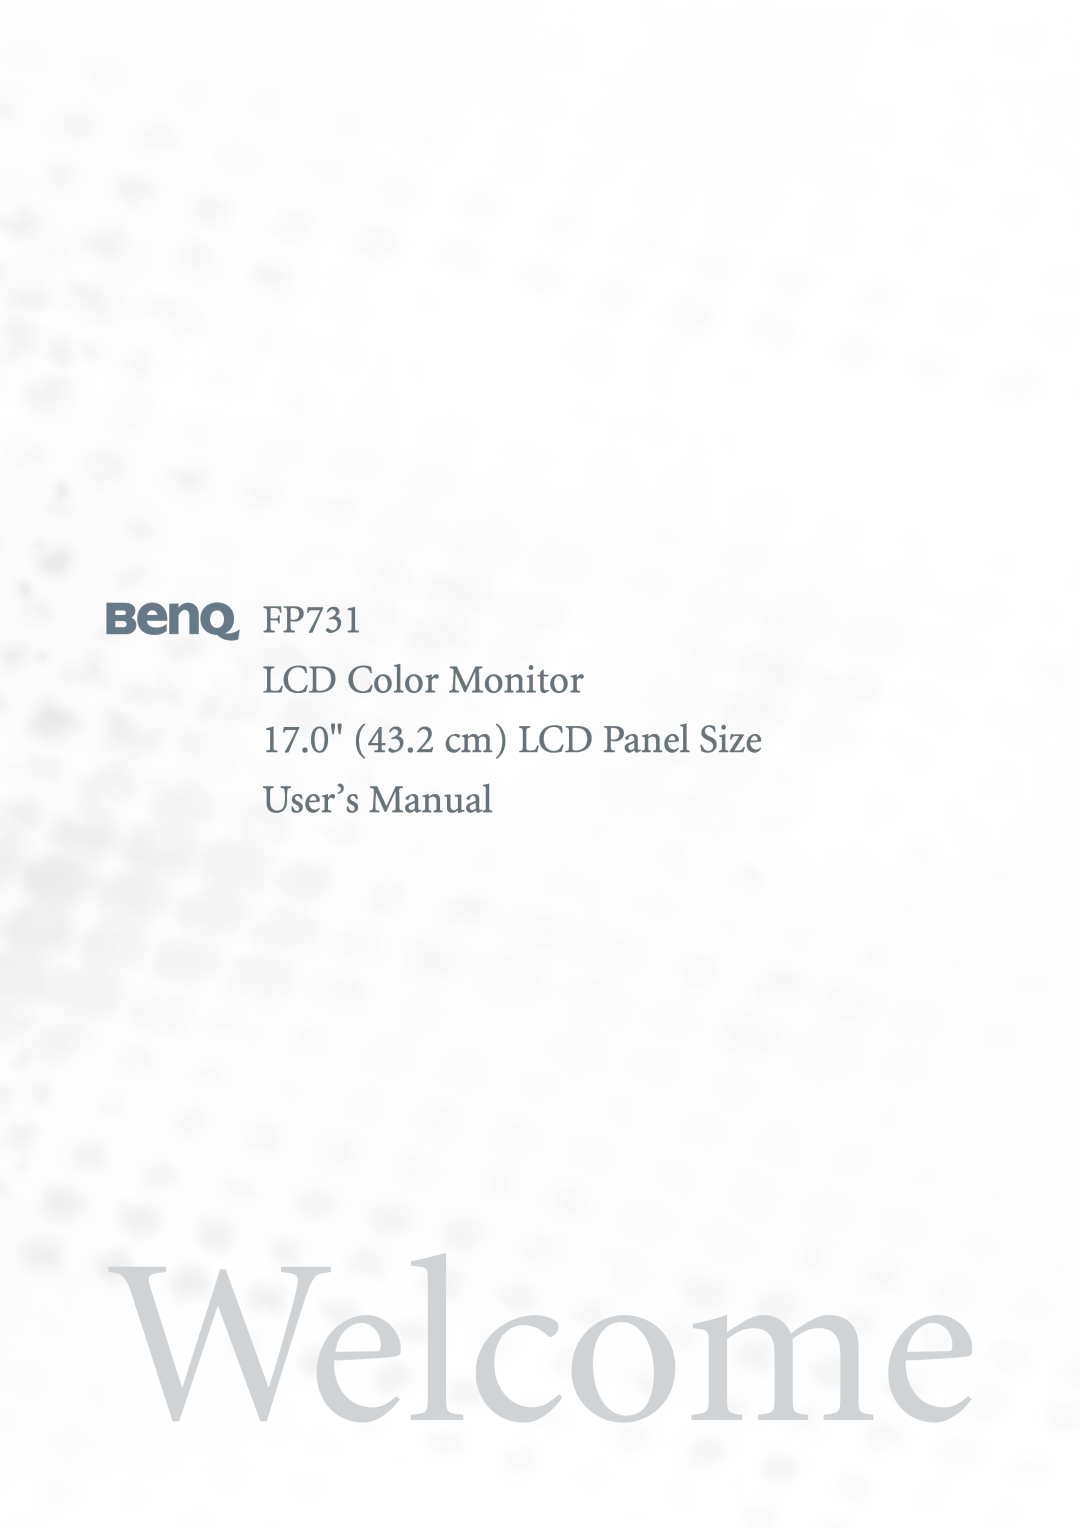 BenQ user manual Welcome, FP731 LCD Color Monitor 17.0 43.2 cm LCD Panel Size User’s Manual 